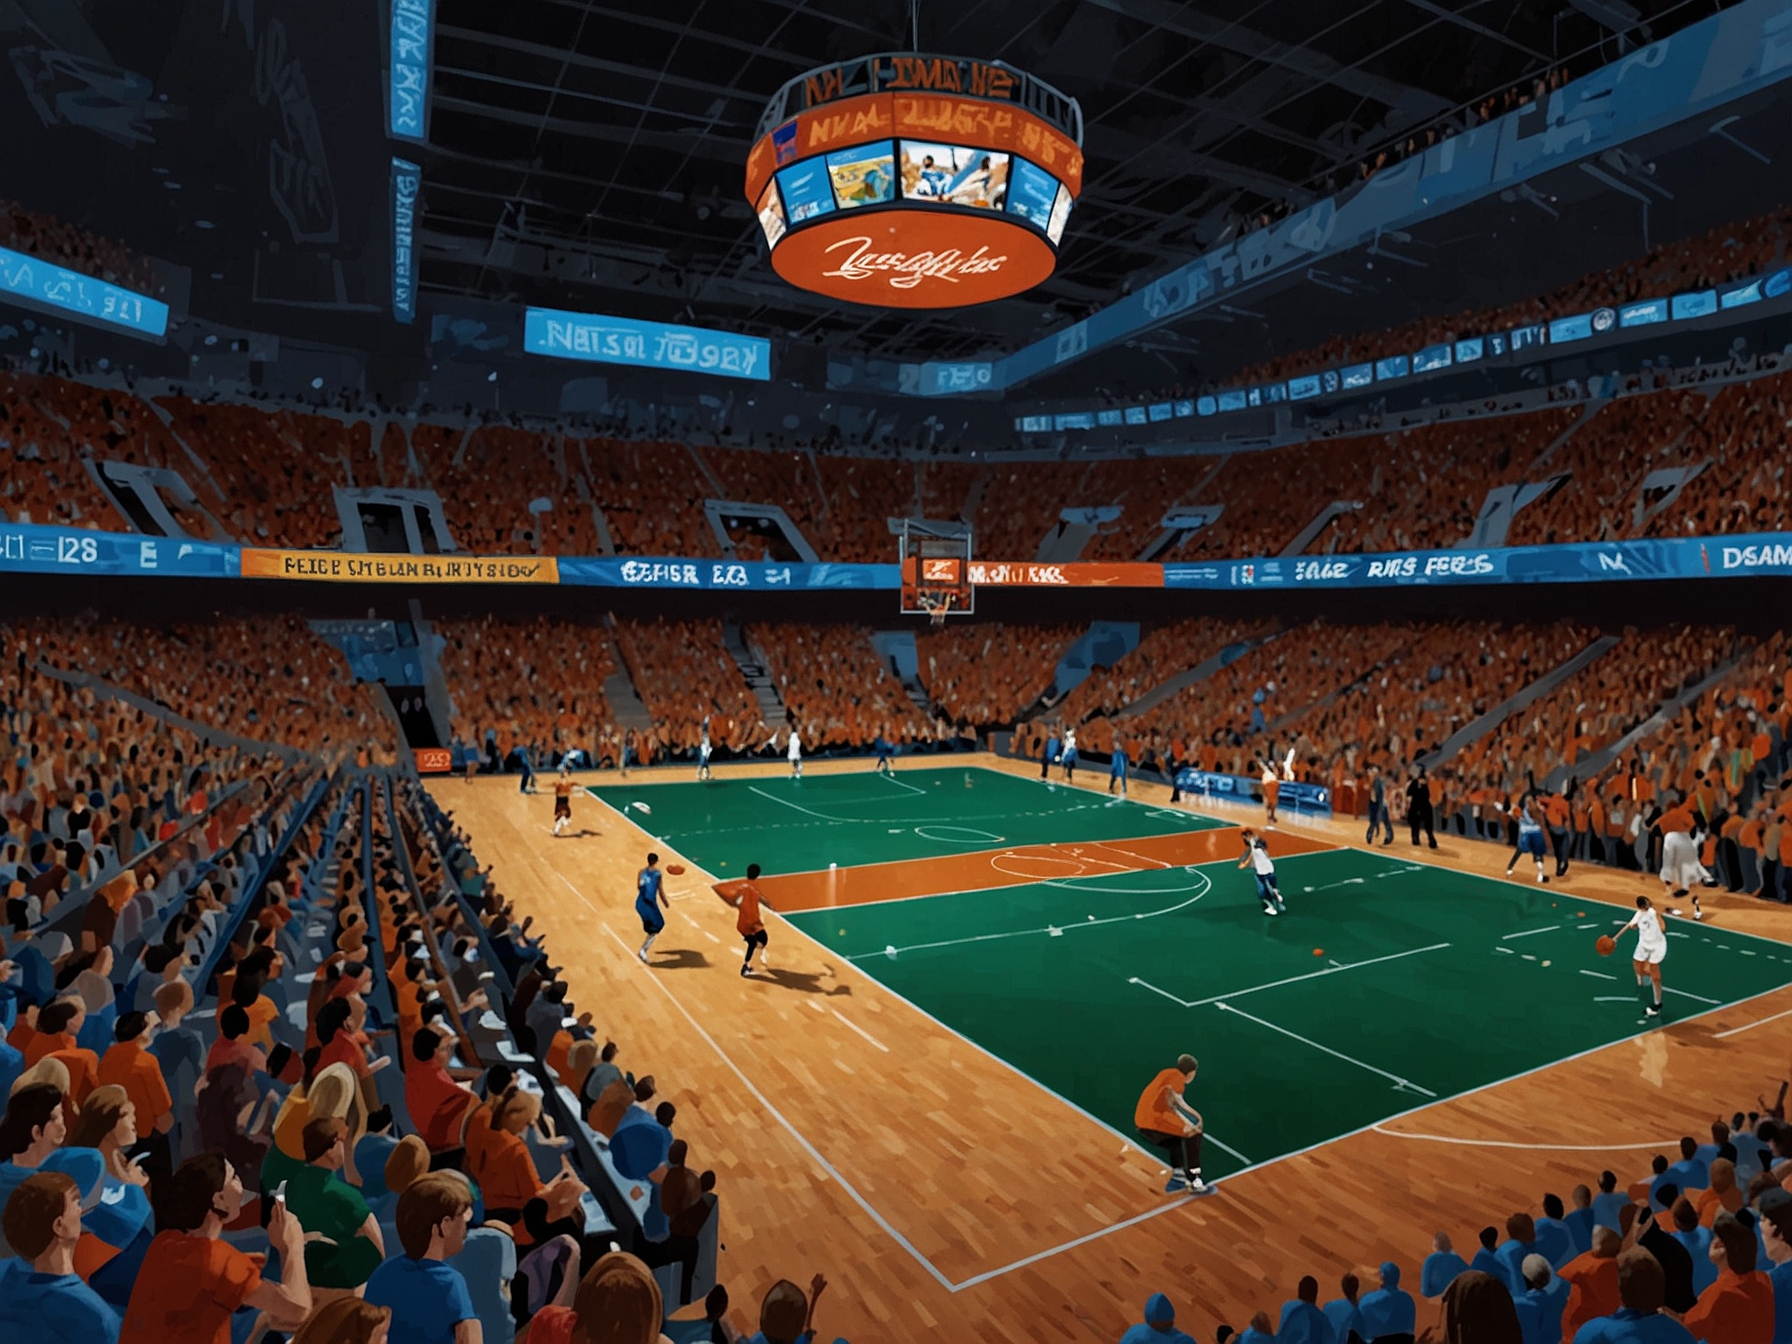 A dynamic game scene from a past NCAA March Madness tournament, highlighting the competitive excitement and national fervor that the proposed expansion seeks to enhance further.